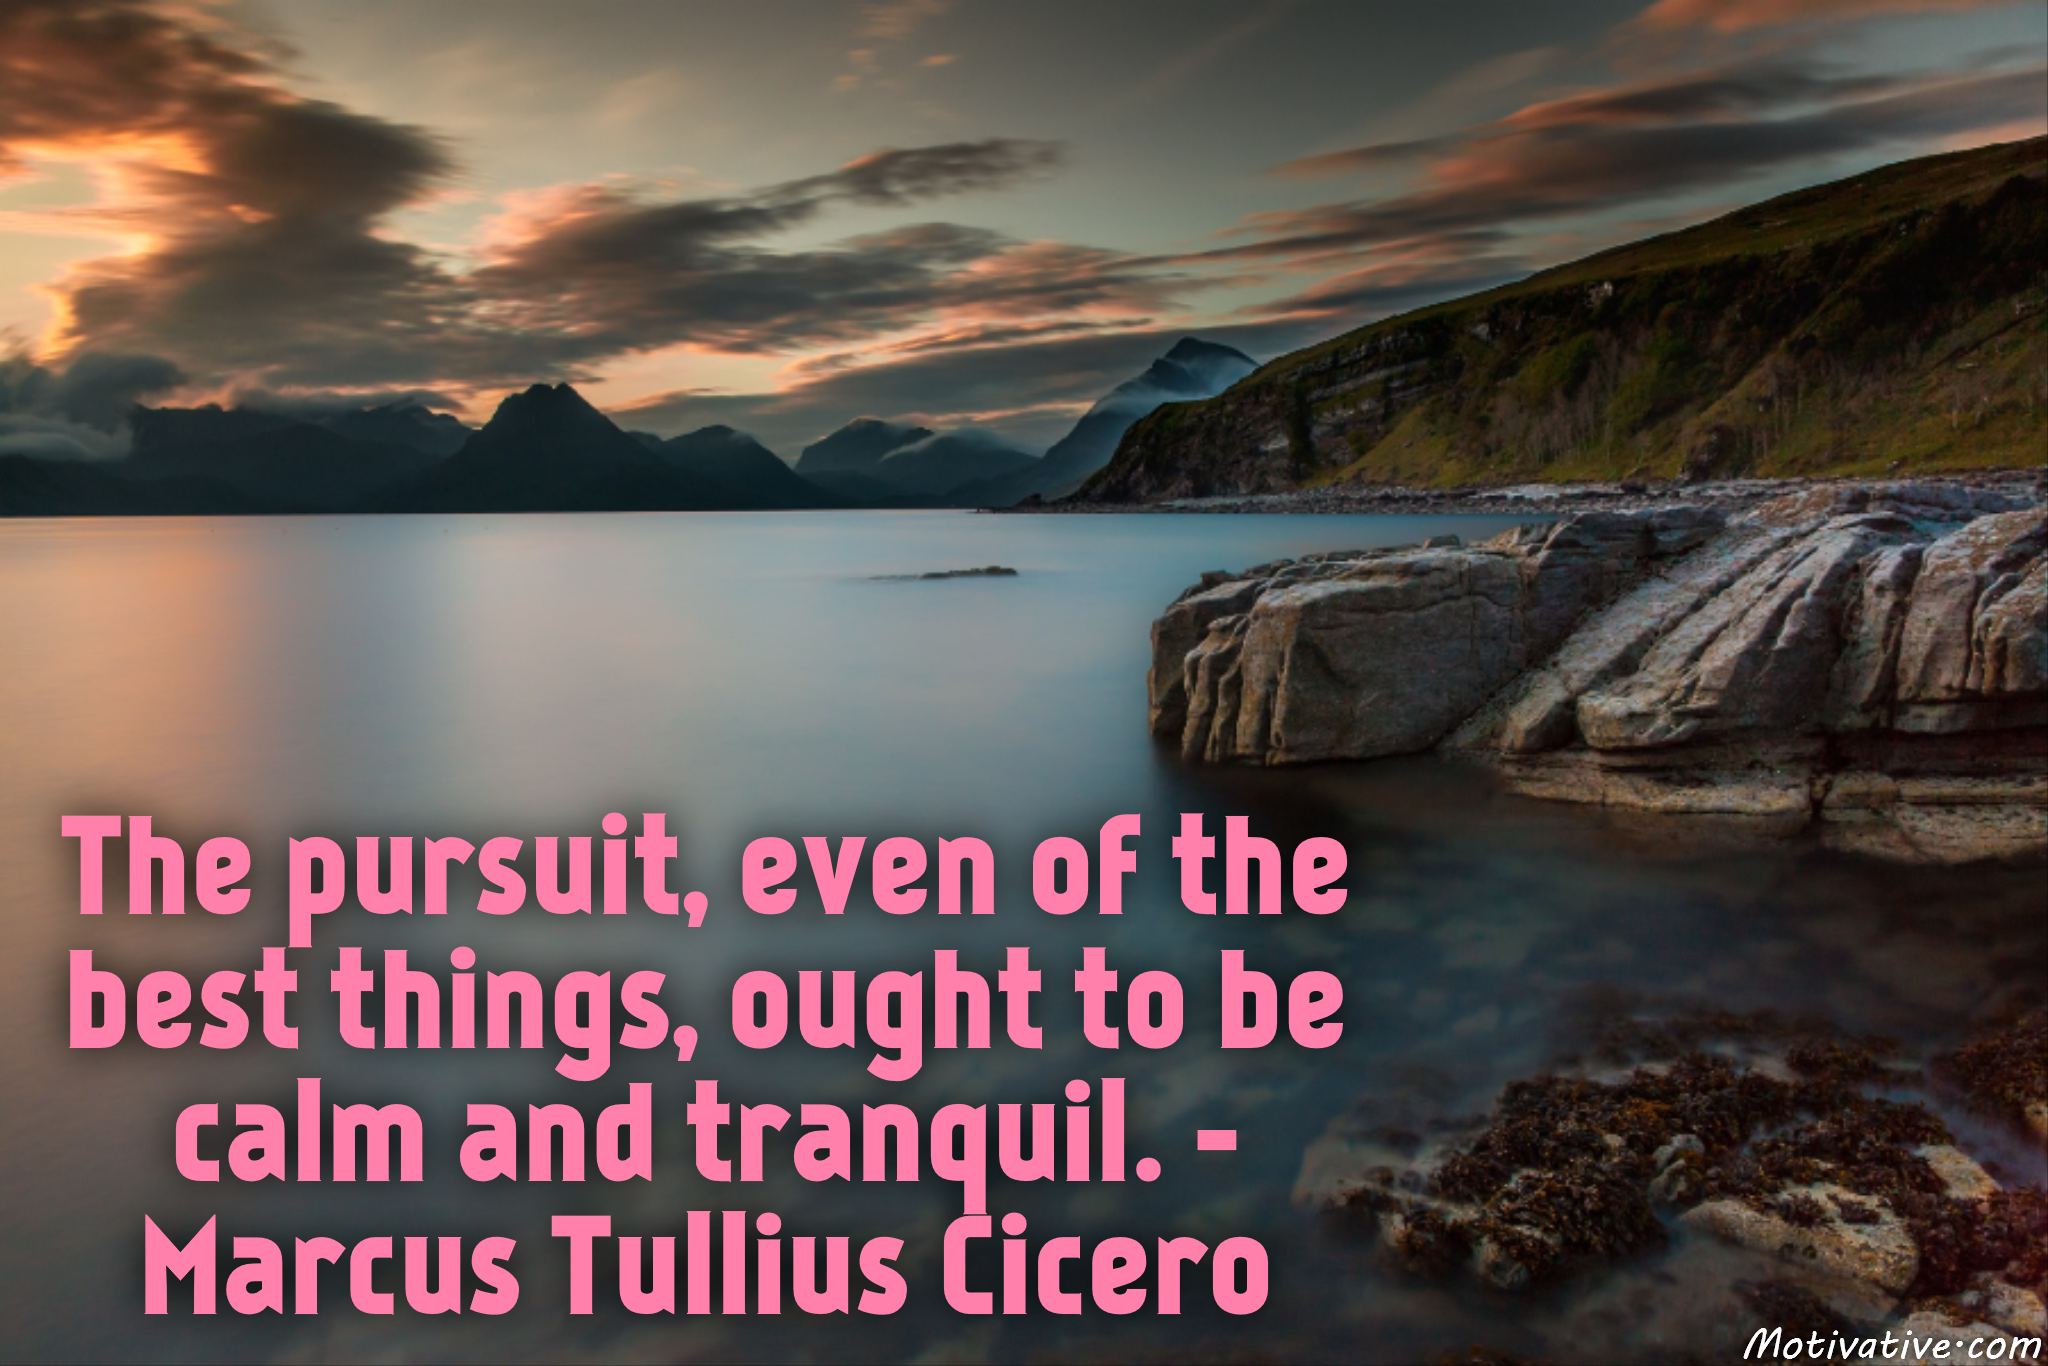 The pursuit, even of the best things, ought to be calm and tranquil. – Marcus Tullius Cicero